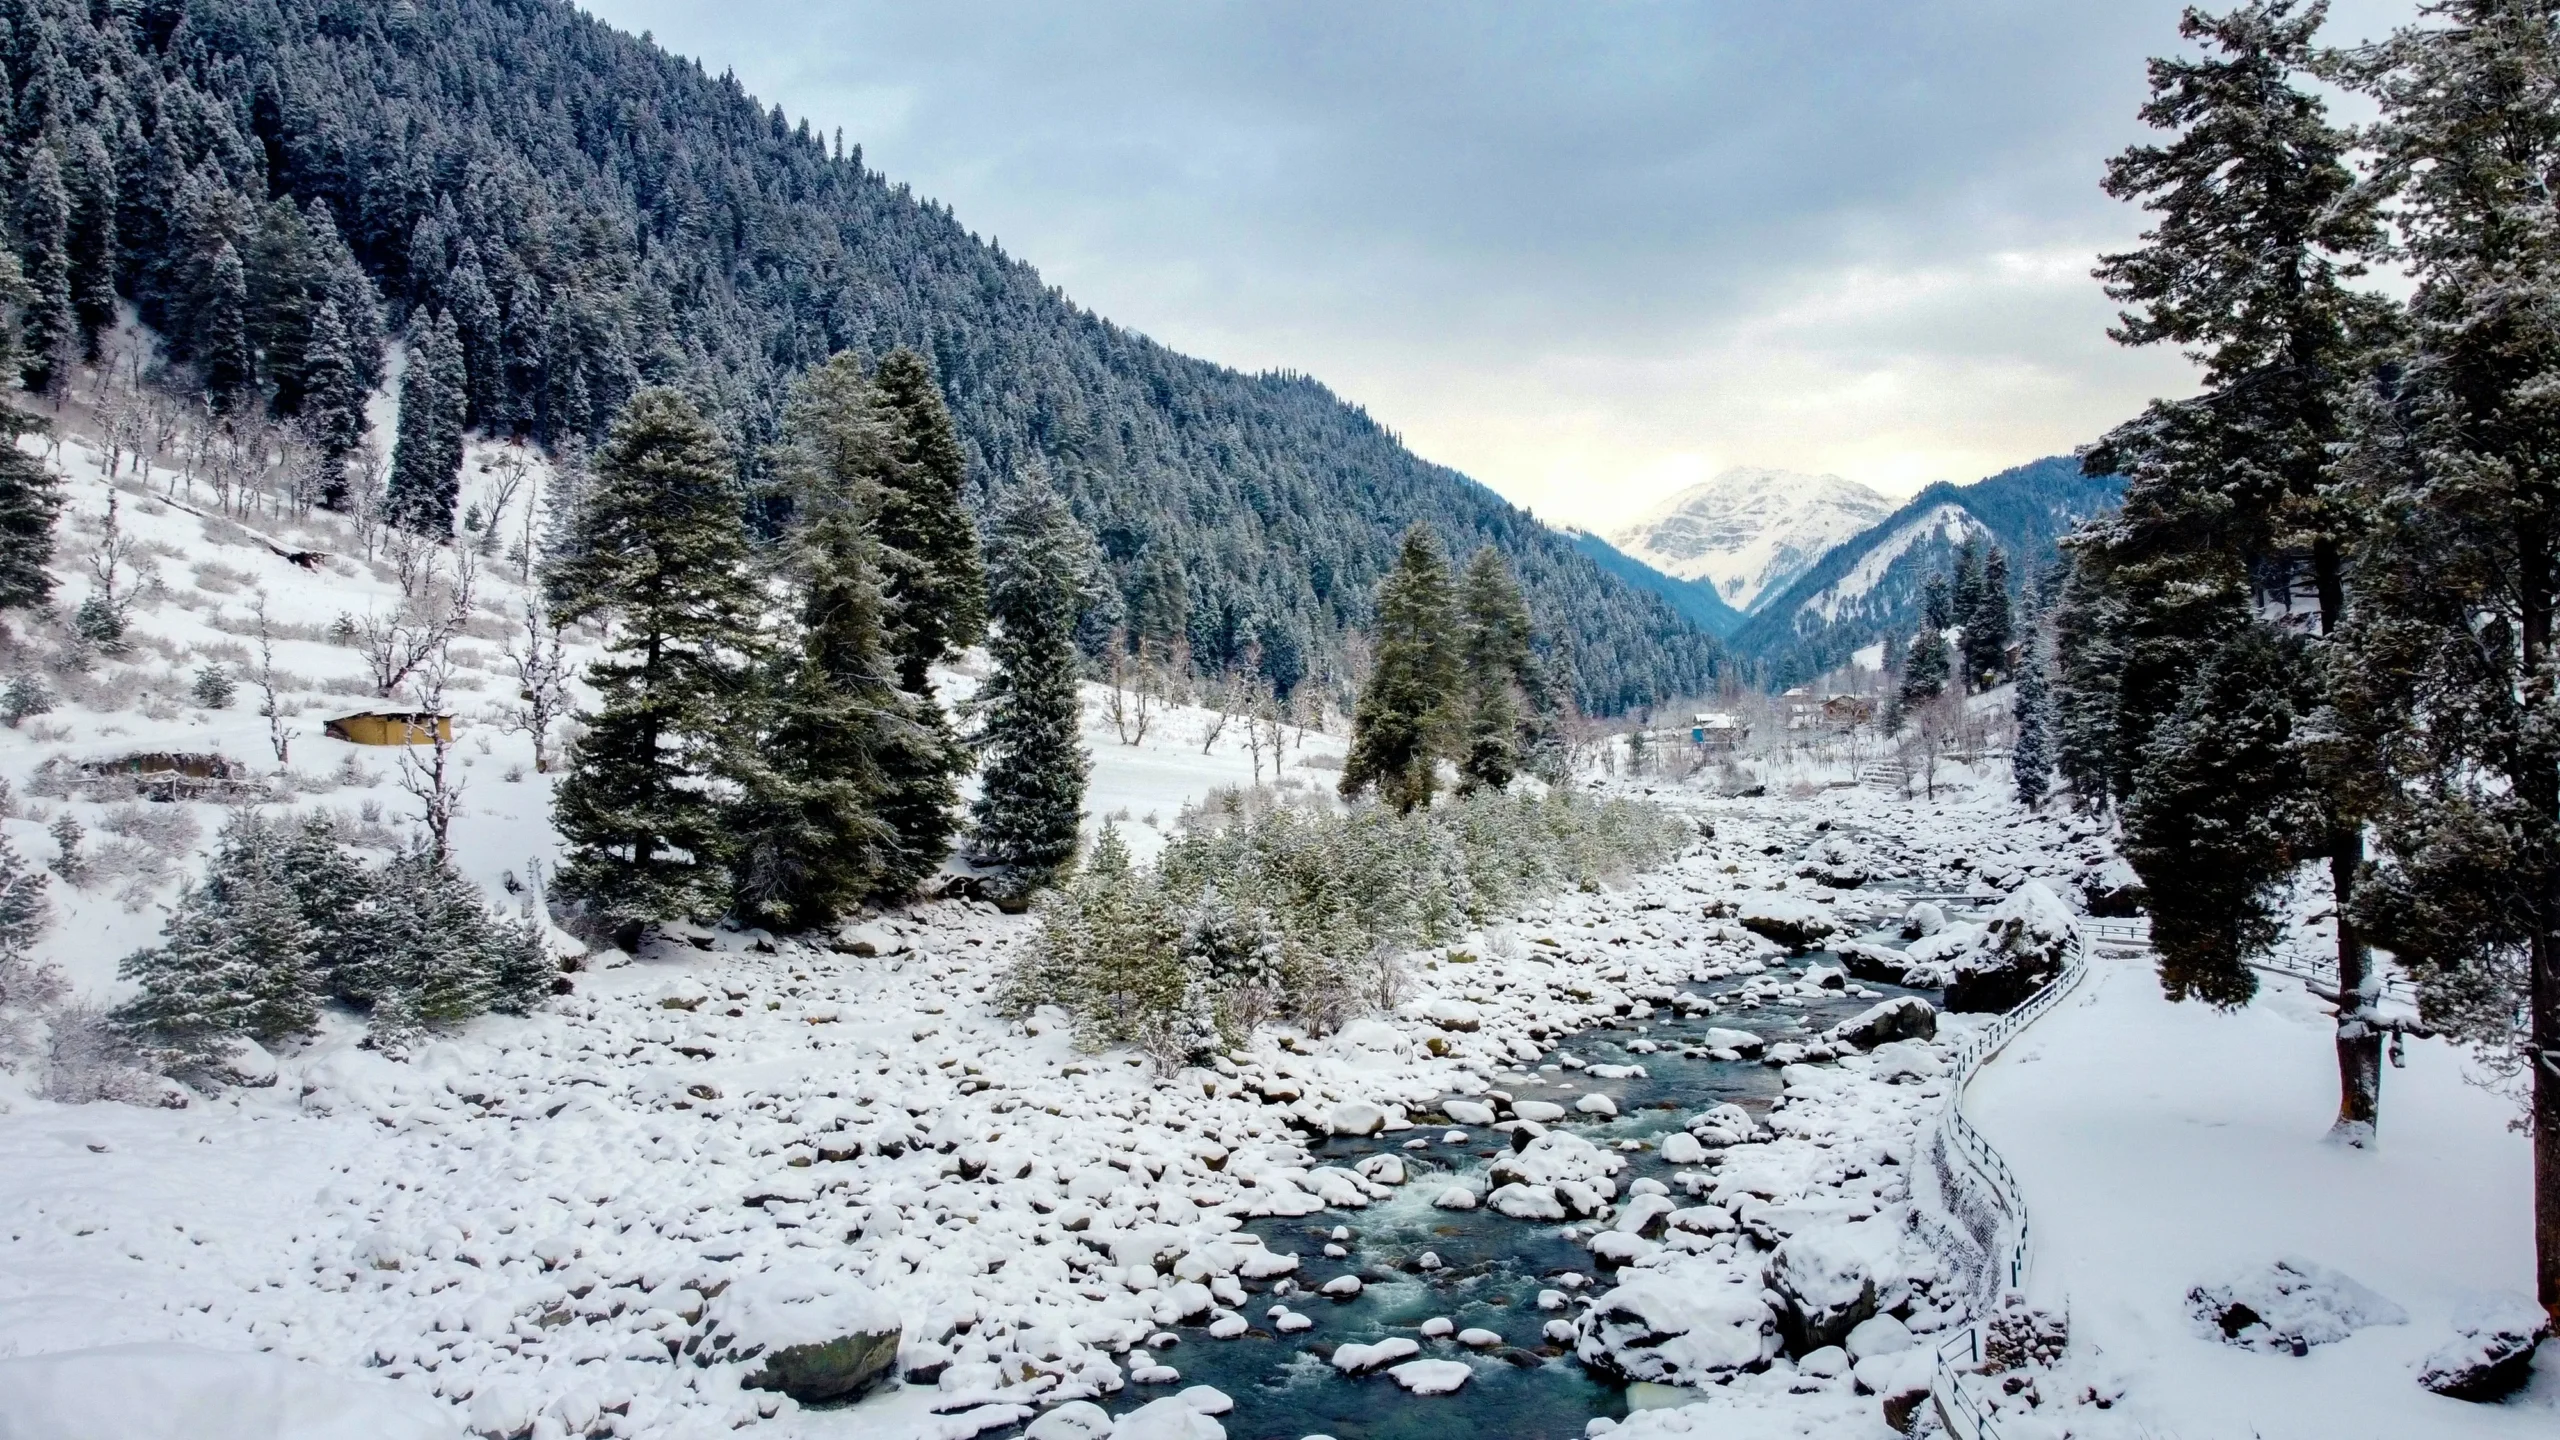 Kashmir is a paradise on earth, and this travel guide will help you discover its enchanting beauty and thrilling adventures. Plan your trip now!